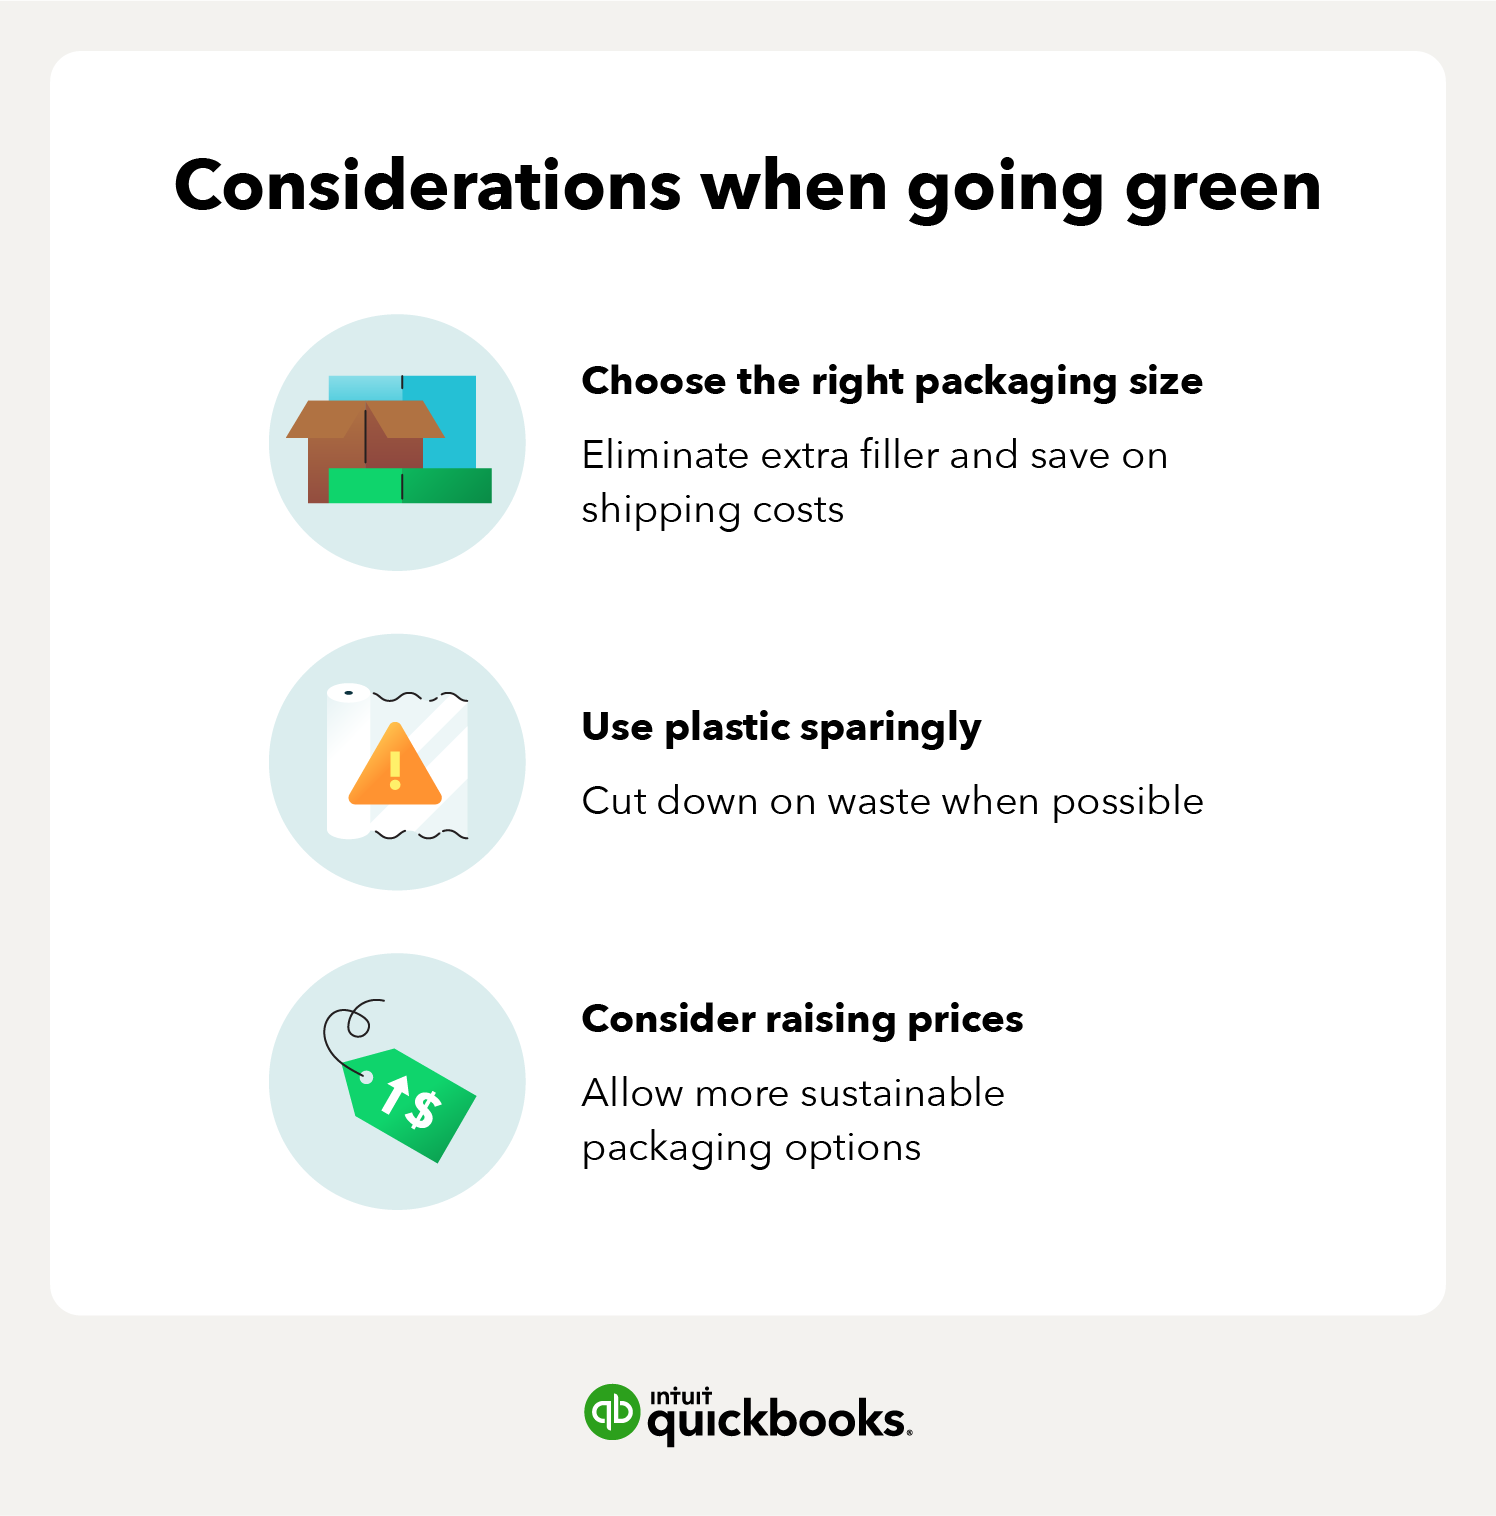 Considerations when going green